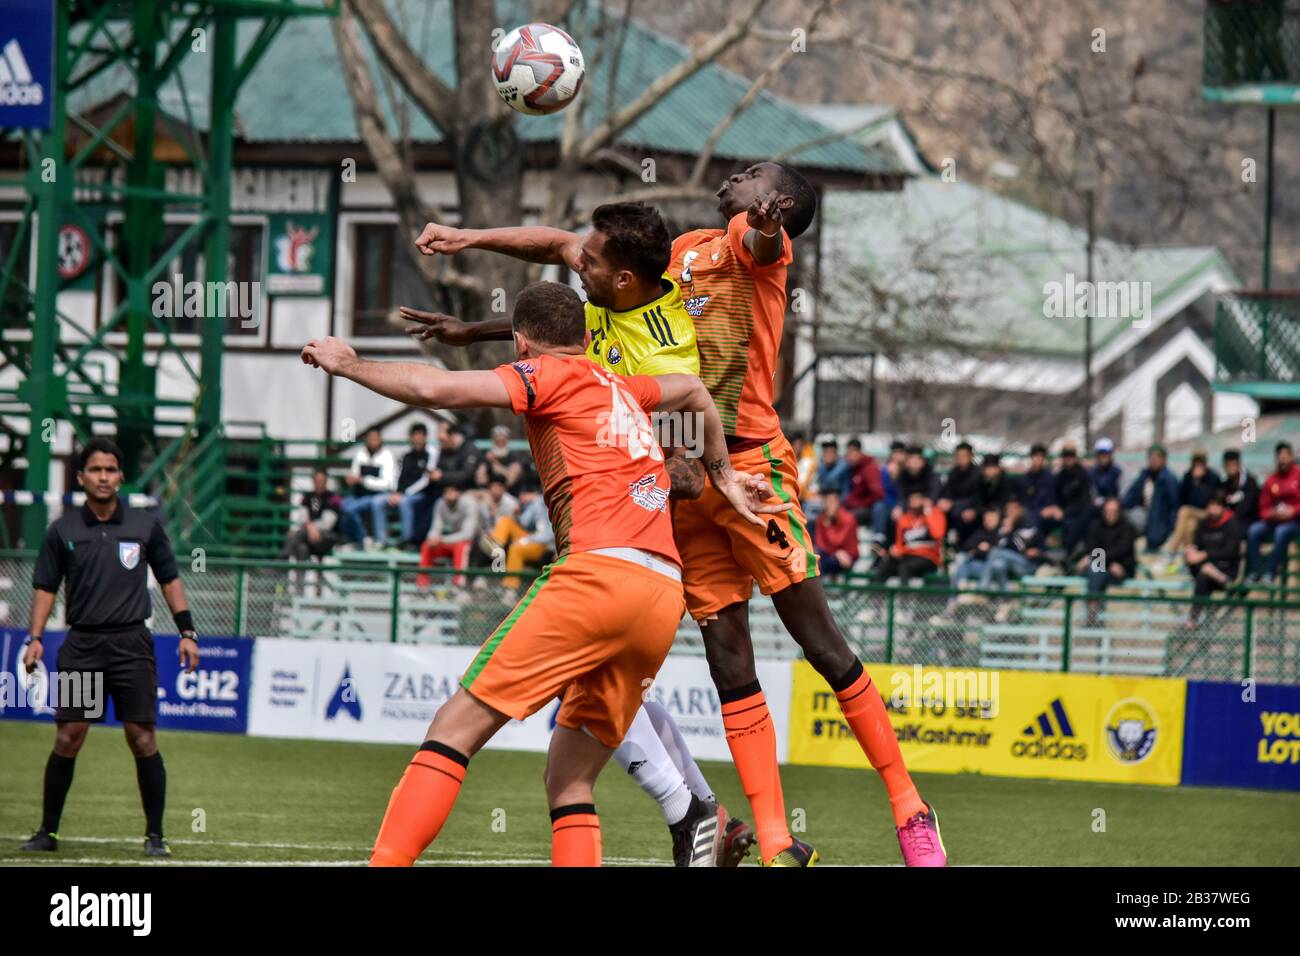 Robin Singh (C) of Real Kashmir seen in action during a football match between Real Kashmir Football Club (FC) and NEROCA at TRC Srinagar.(Final score; Real Kashmir Football FC 1:0 NEROCA) Stock Photo